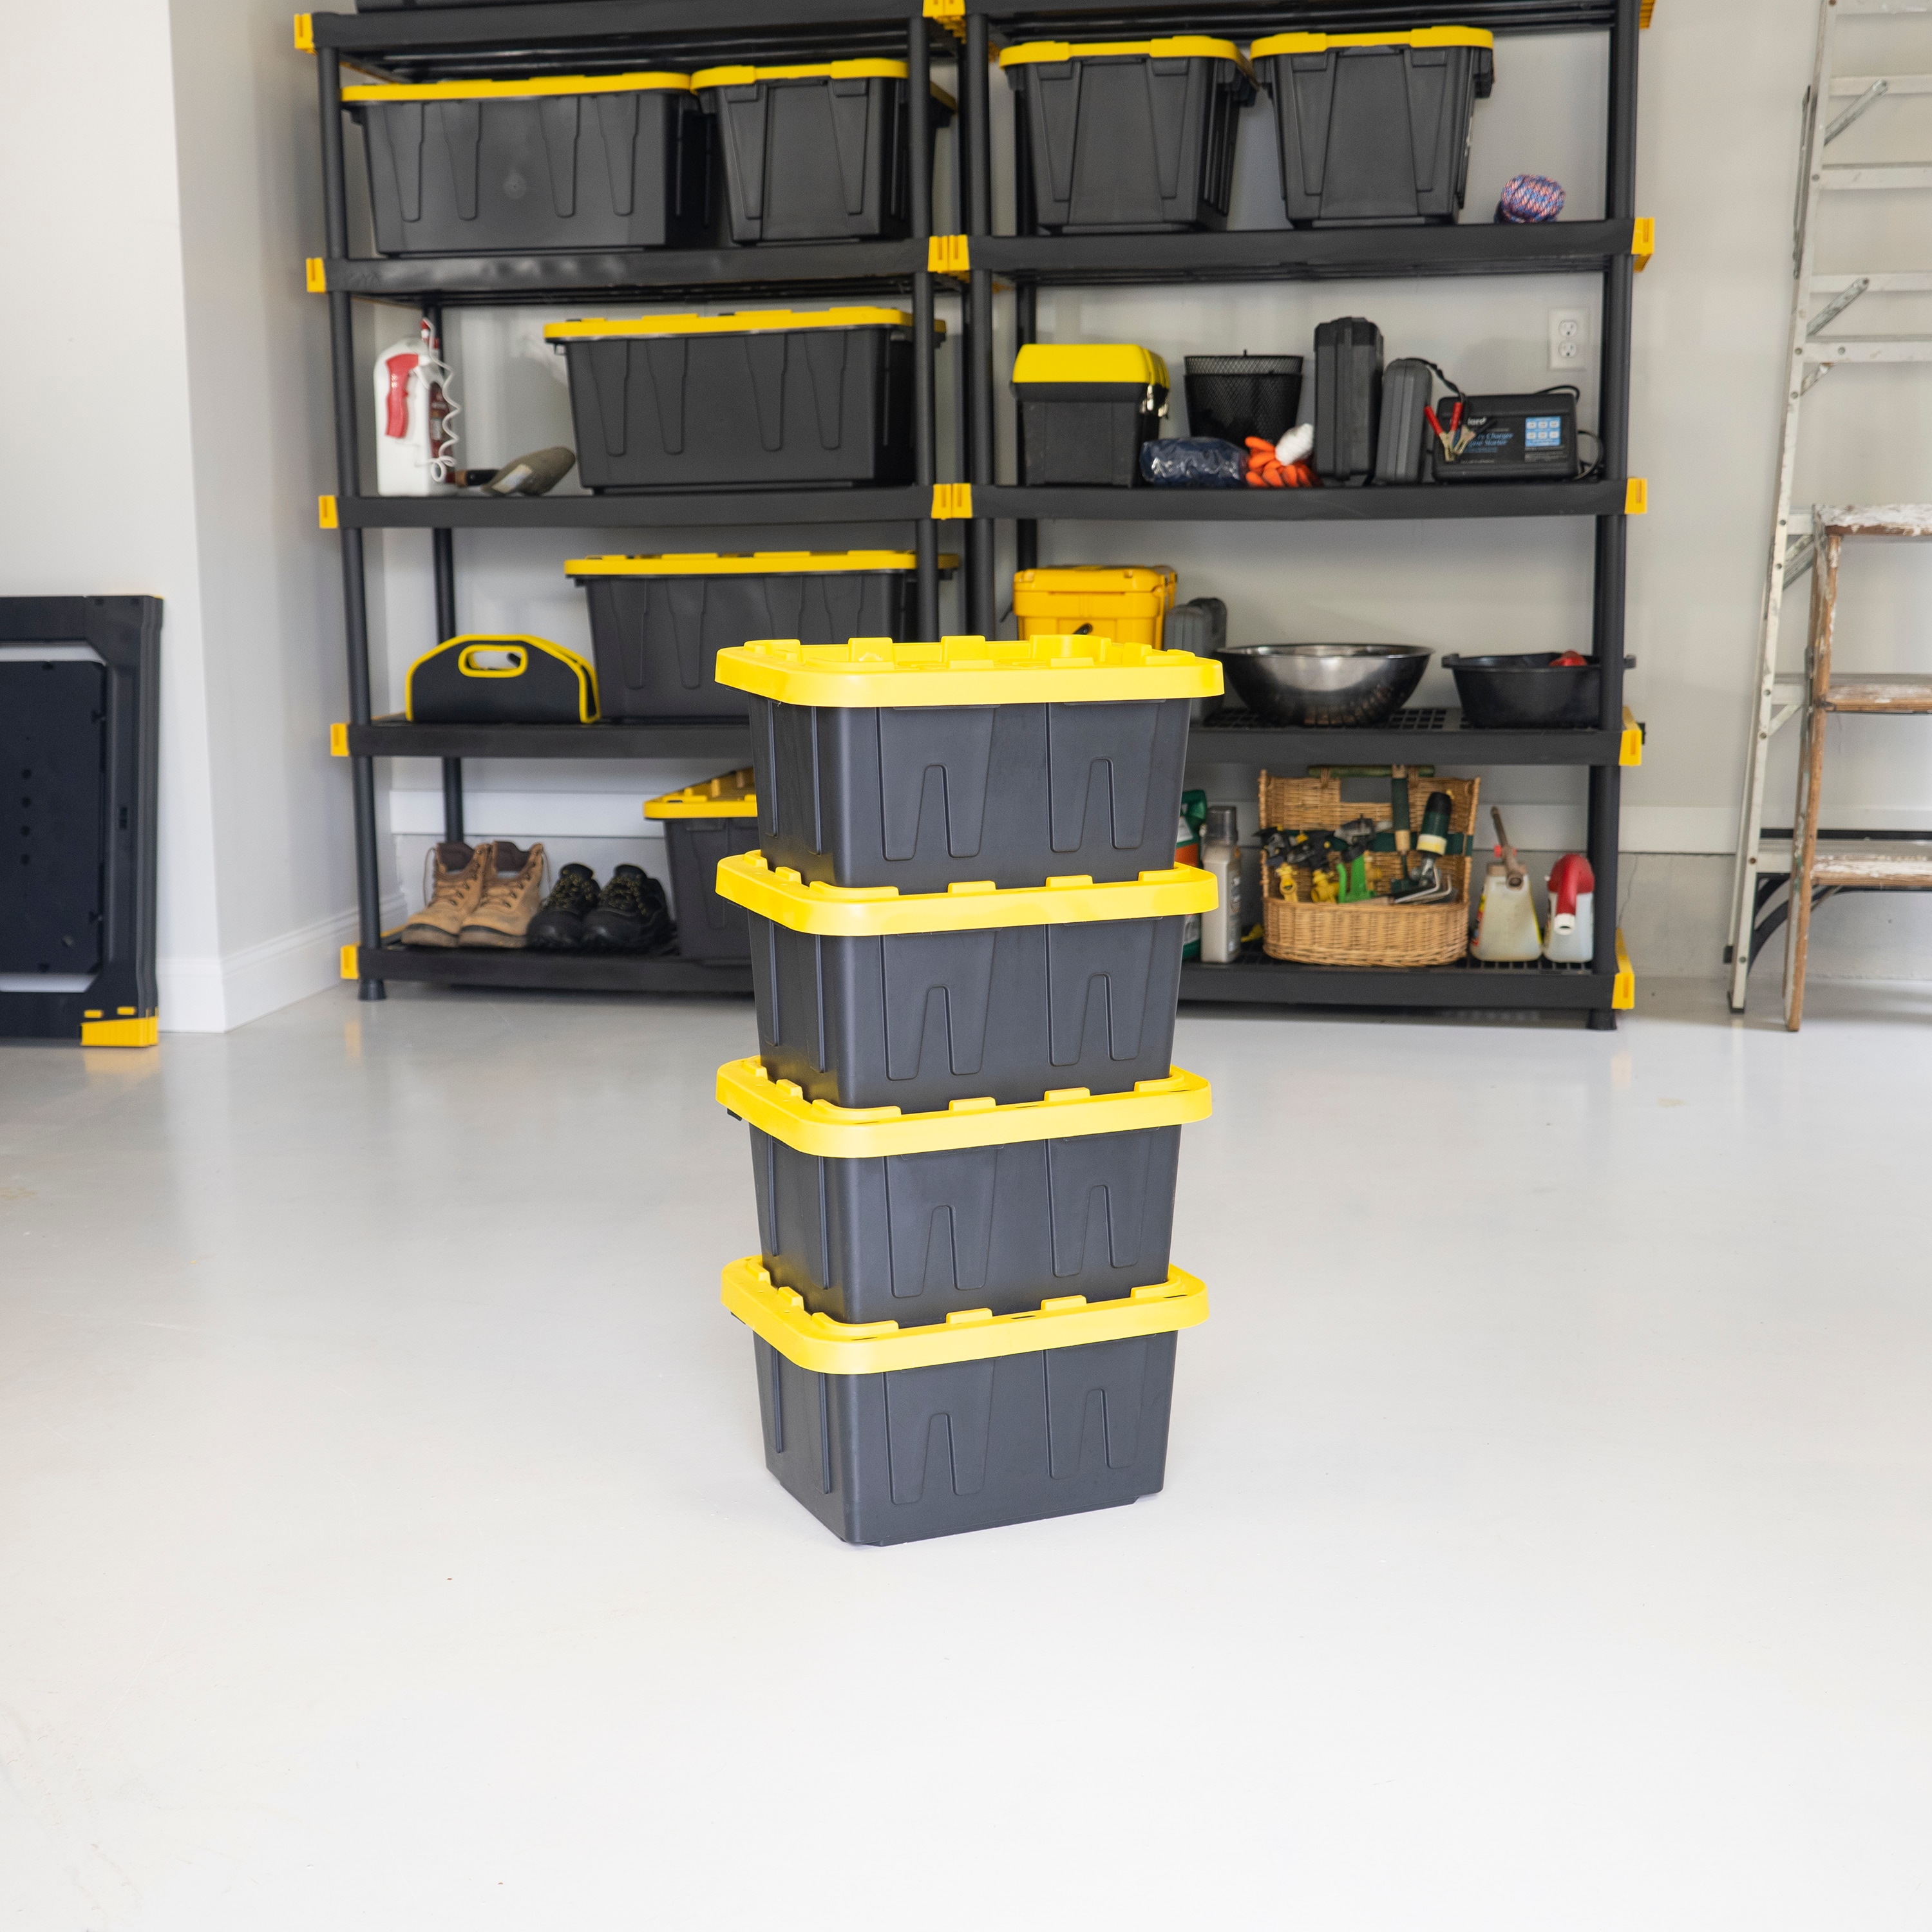 BLACK & YELLOW®, 5-Gallon Heavy Duty Tough Storage Container & Snap-Tight  Lid, (8.6”H x 12.3”W x 16.4”D), Weather-Resistant Design and Stackable